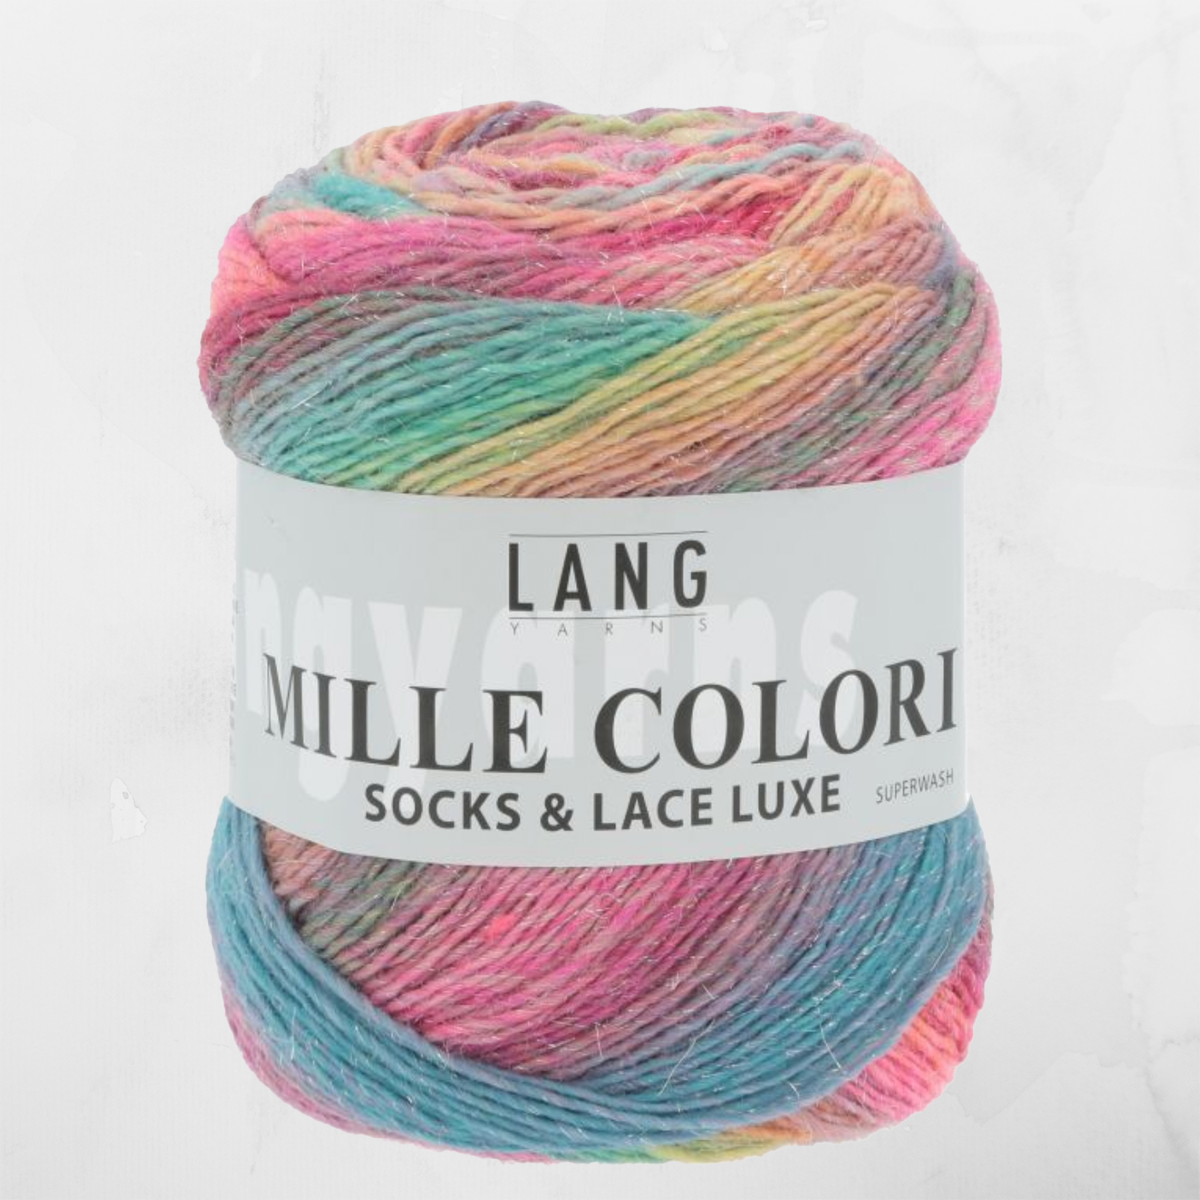 Mille Colori Socks and Lace Luxe - Lang Yarns